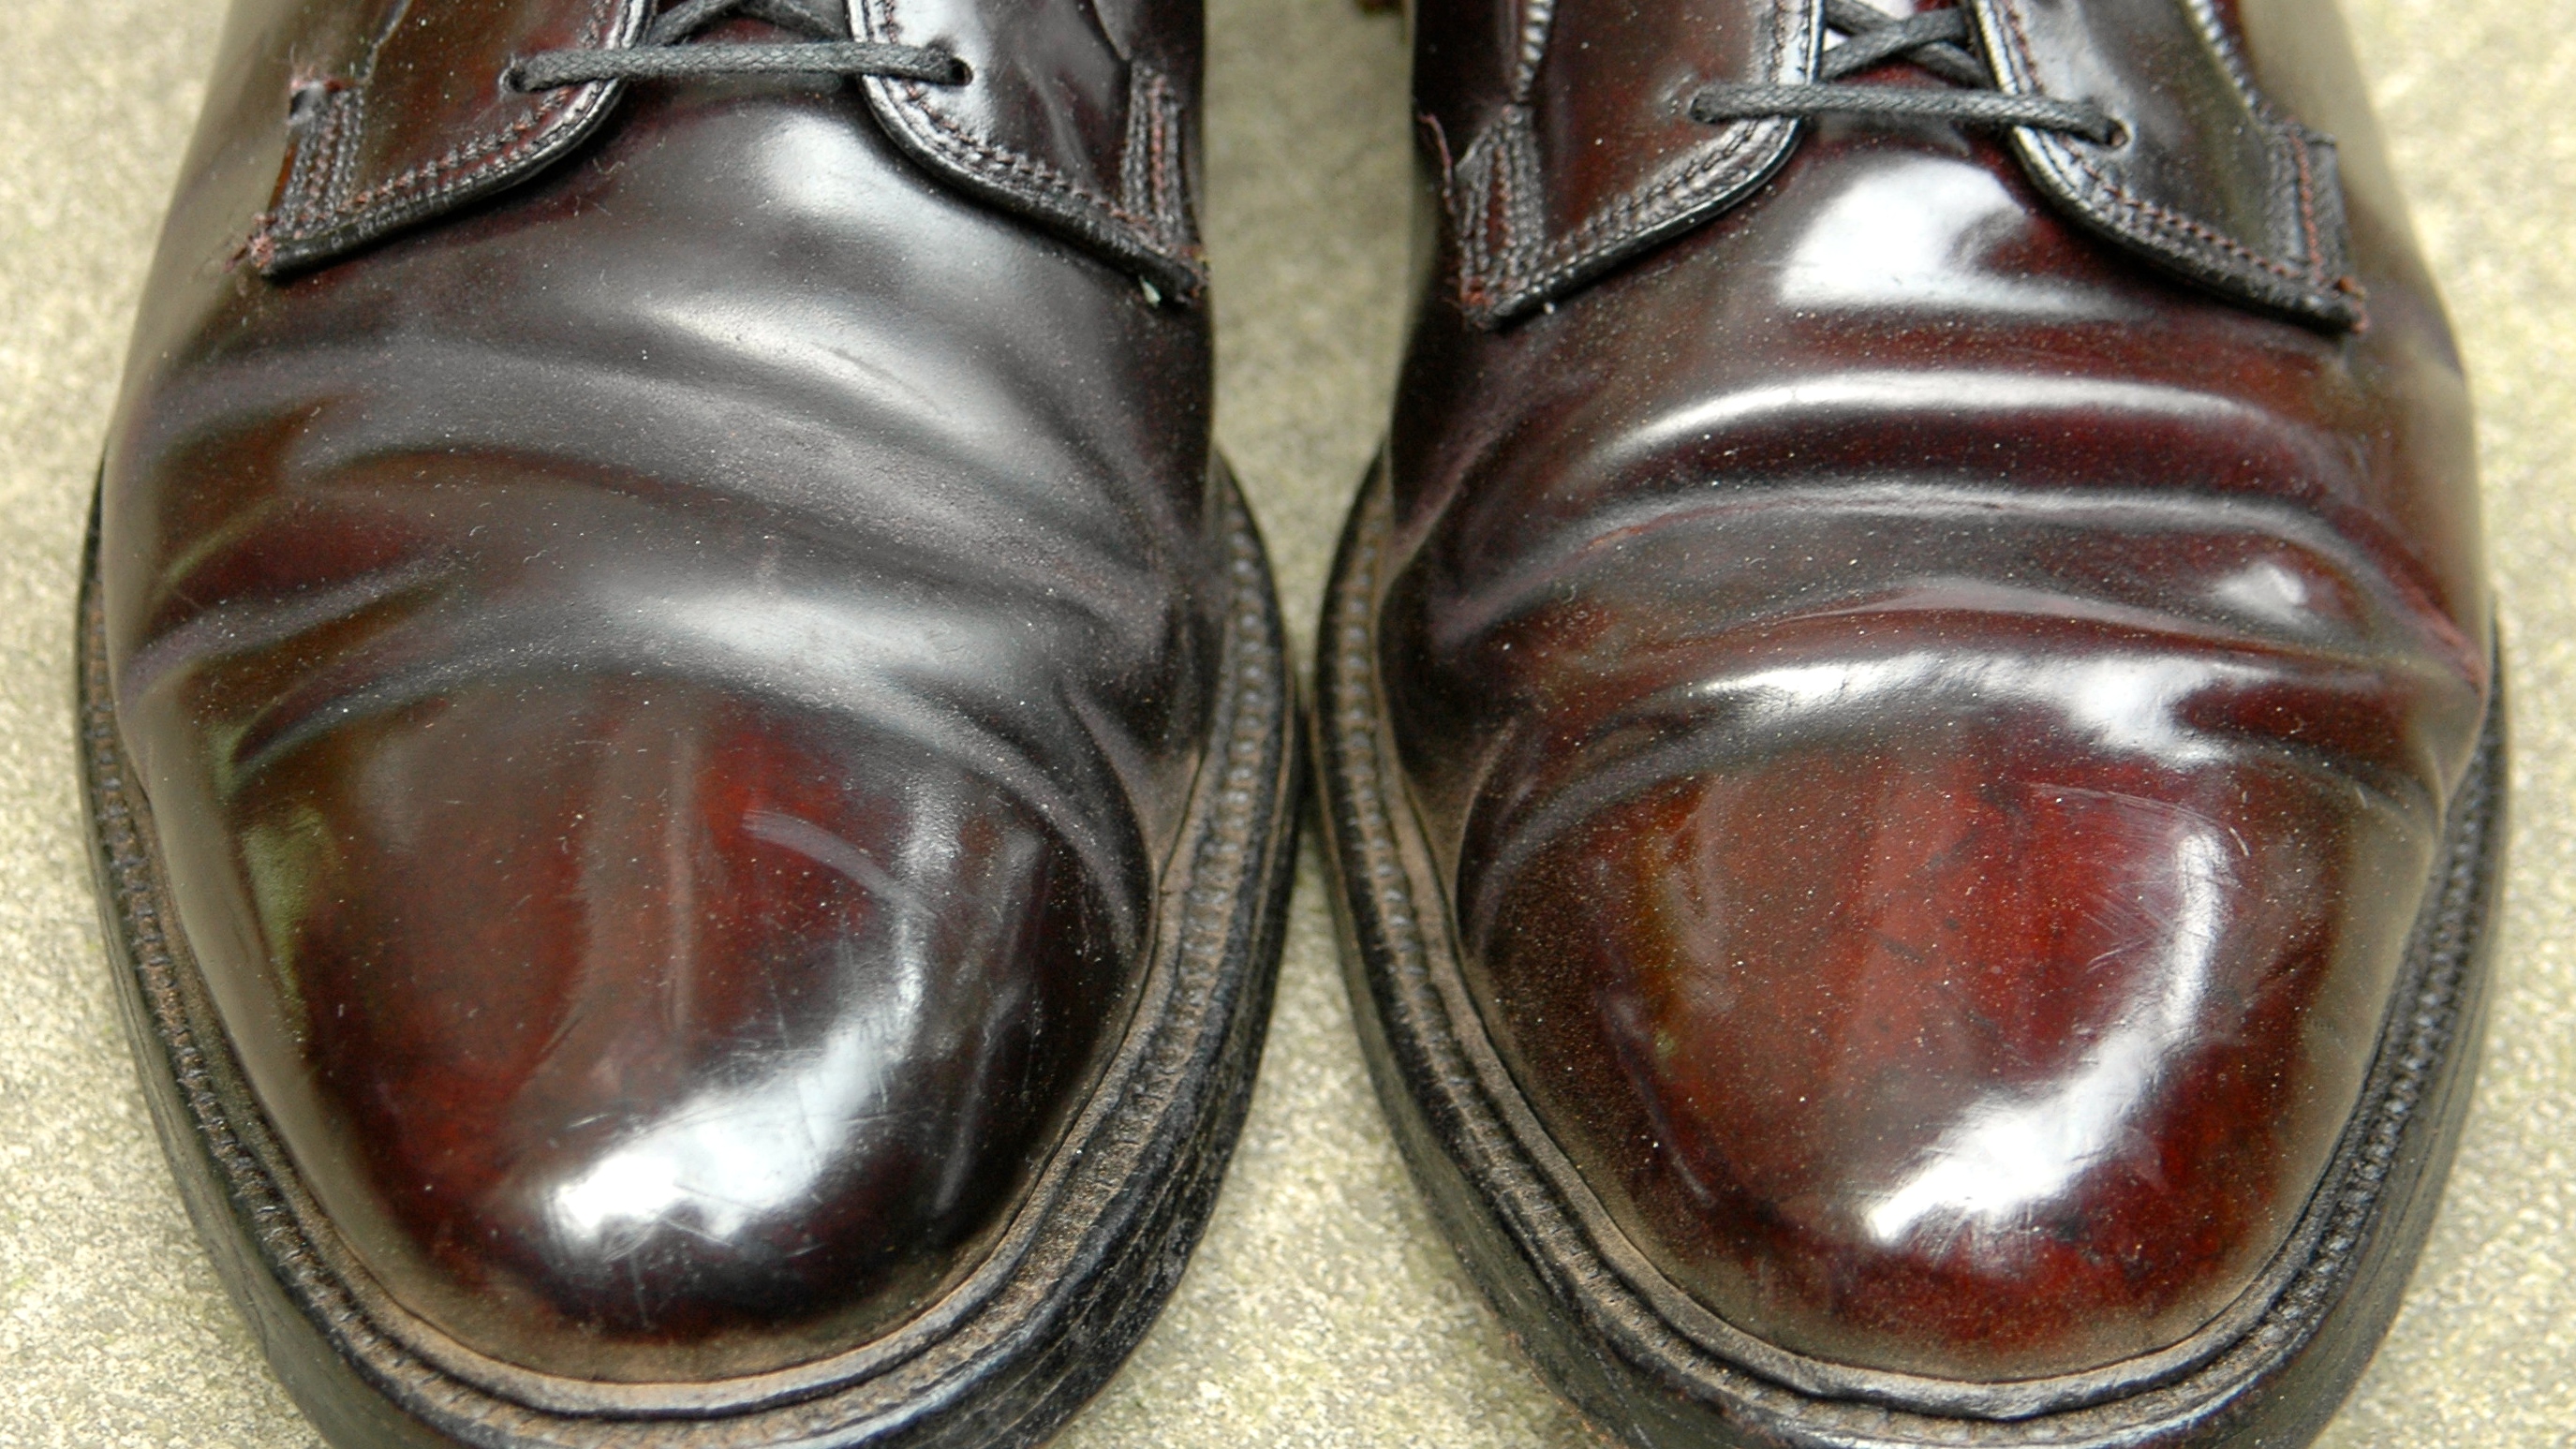 used shell cordovan shoes